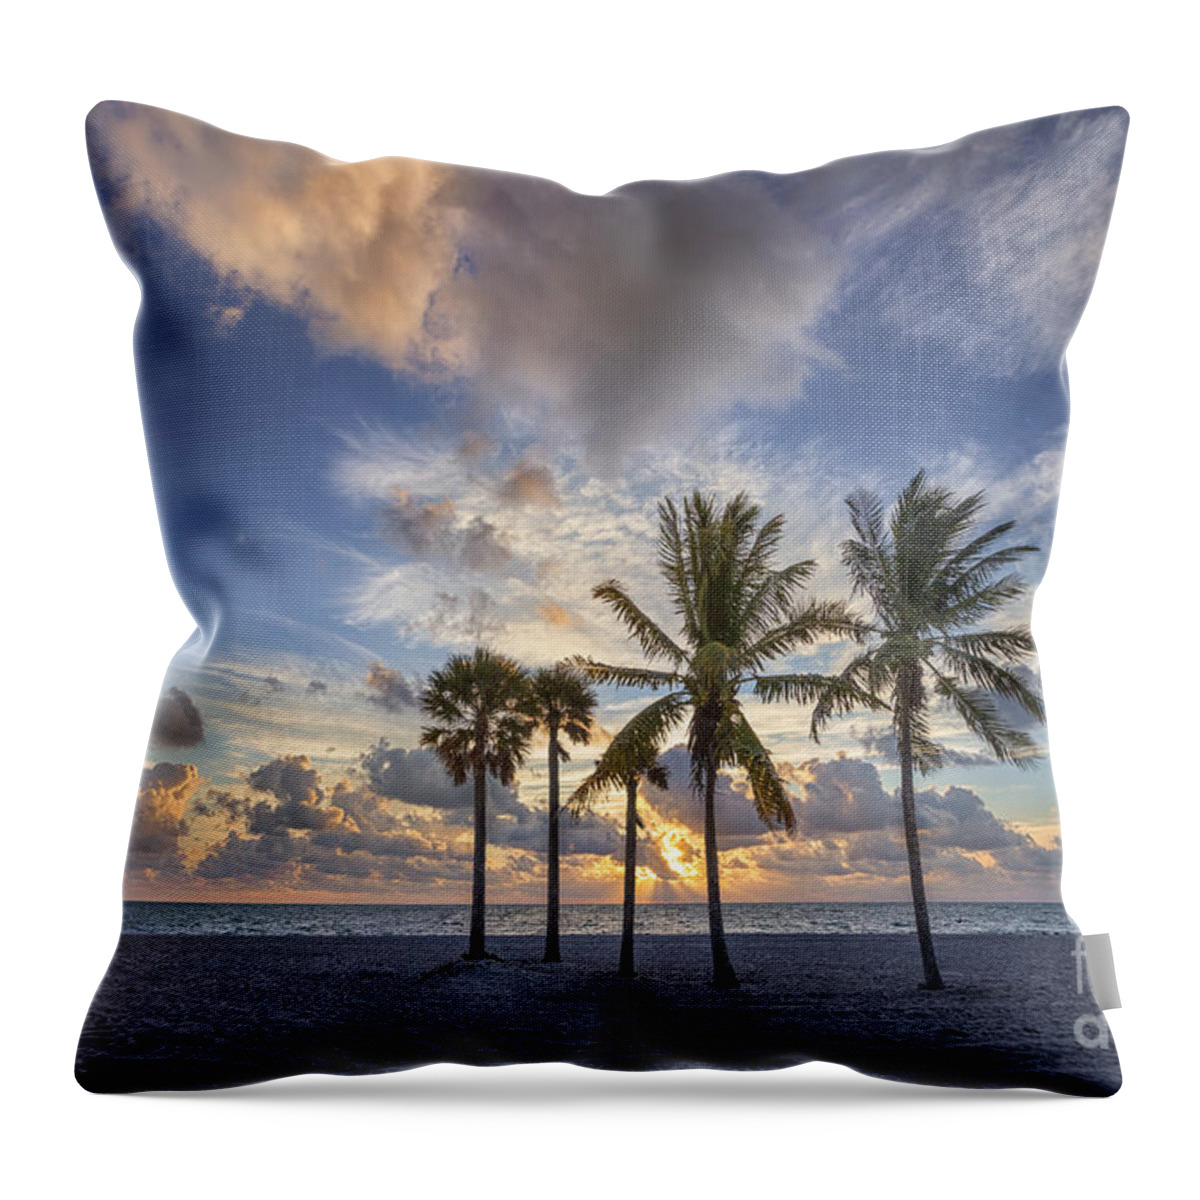 Key Biscayne Throw Pillow featuring the photograph A New Tomorrow by Evelina Kremsdorf